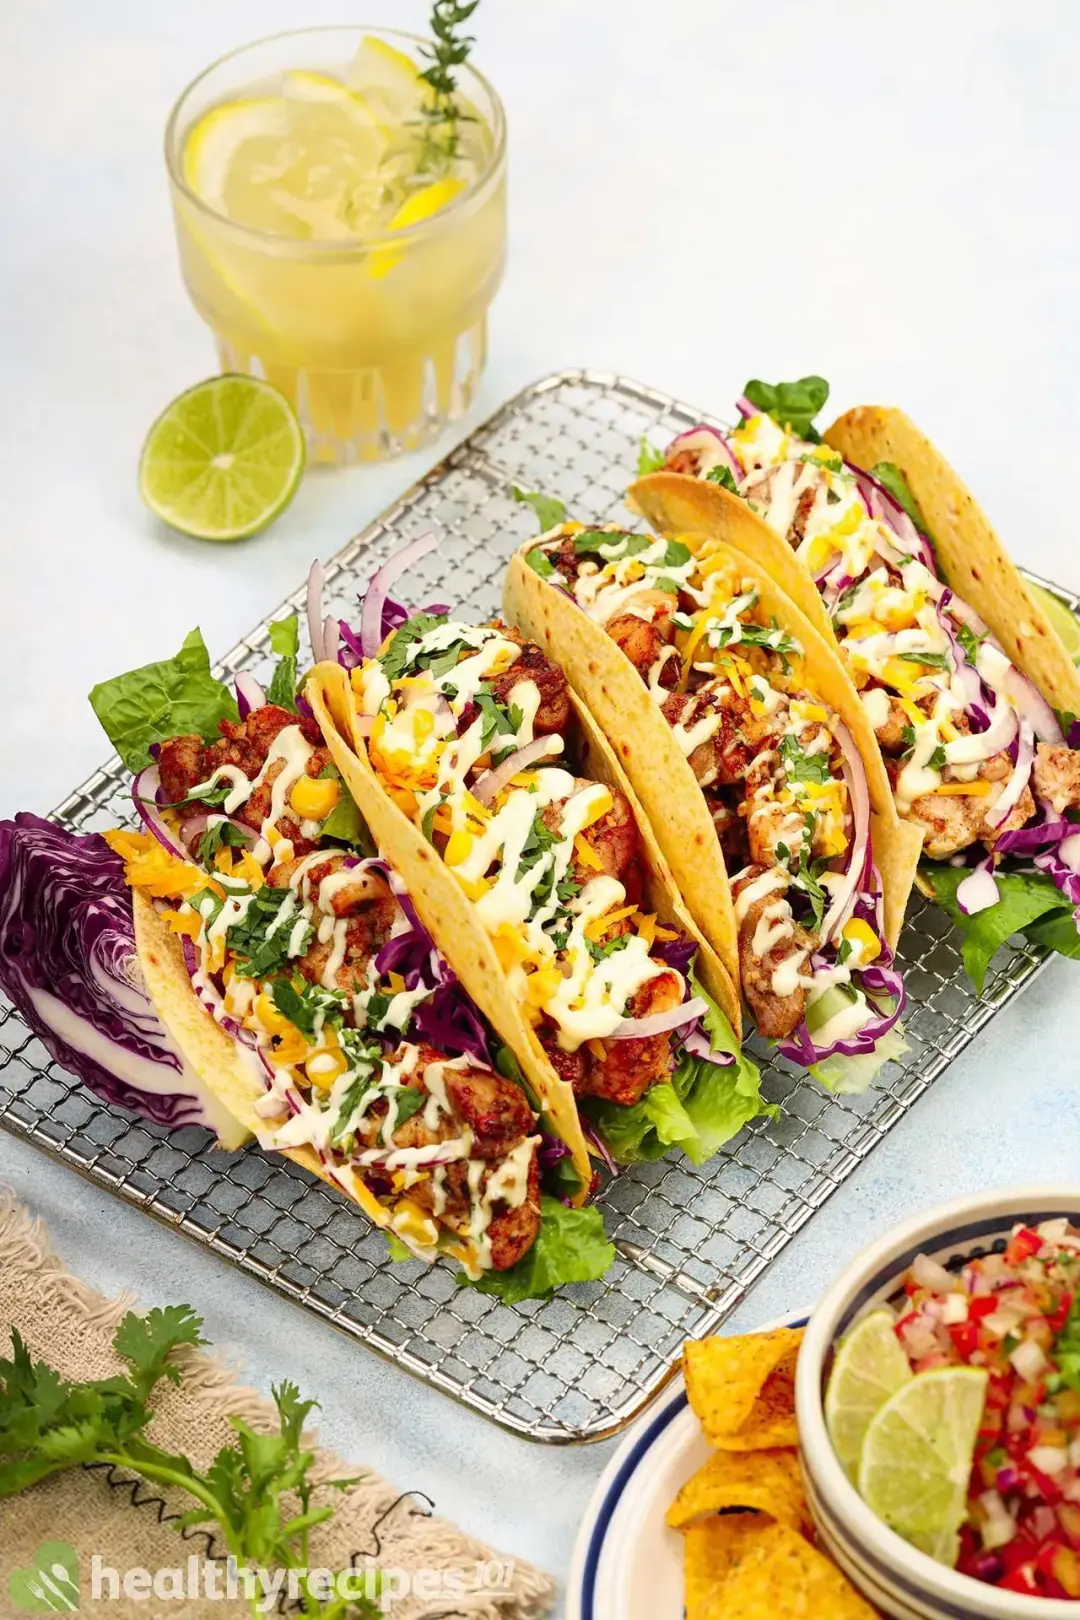 What to Serve With Air Fryer Chicken Tacos